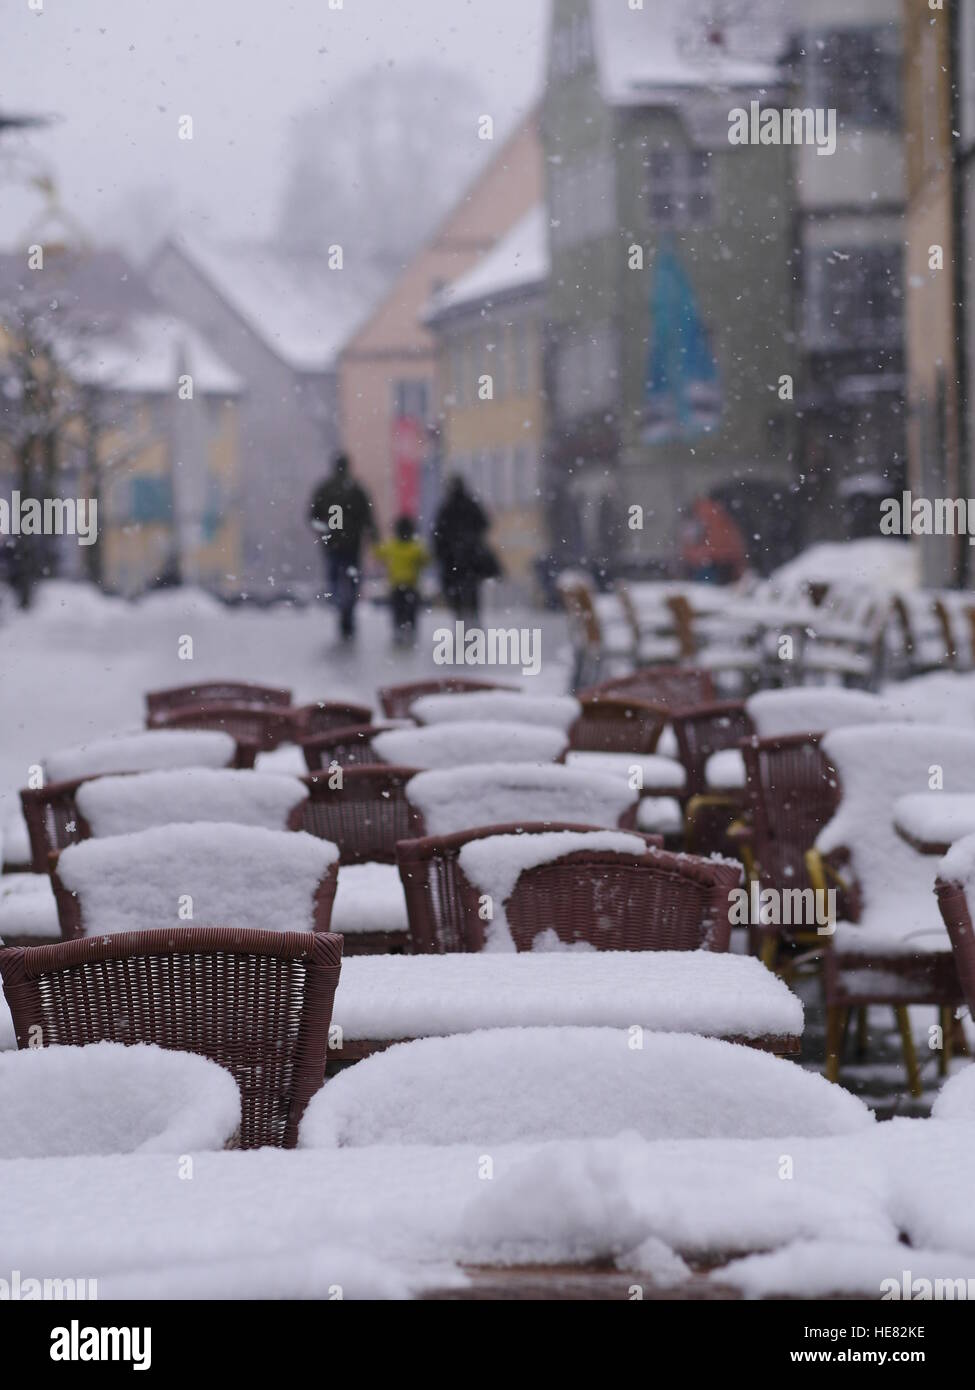 Chaises tables snowy winter Banque D'Images